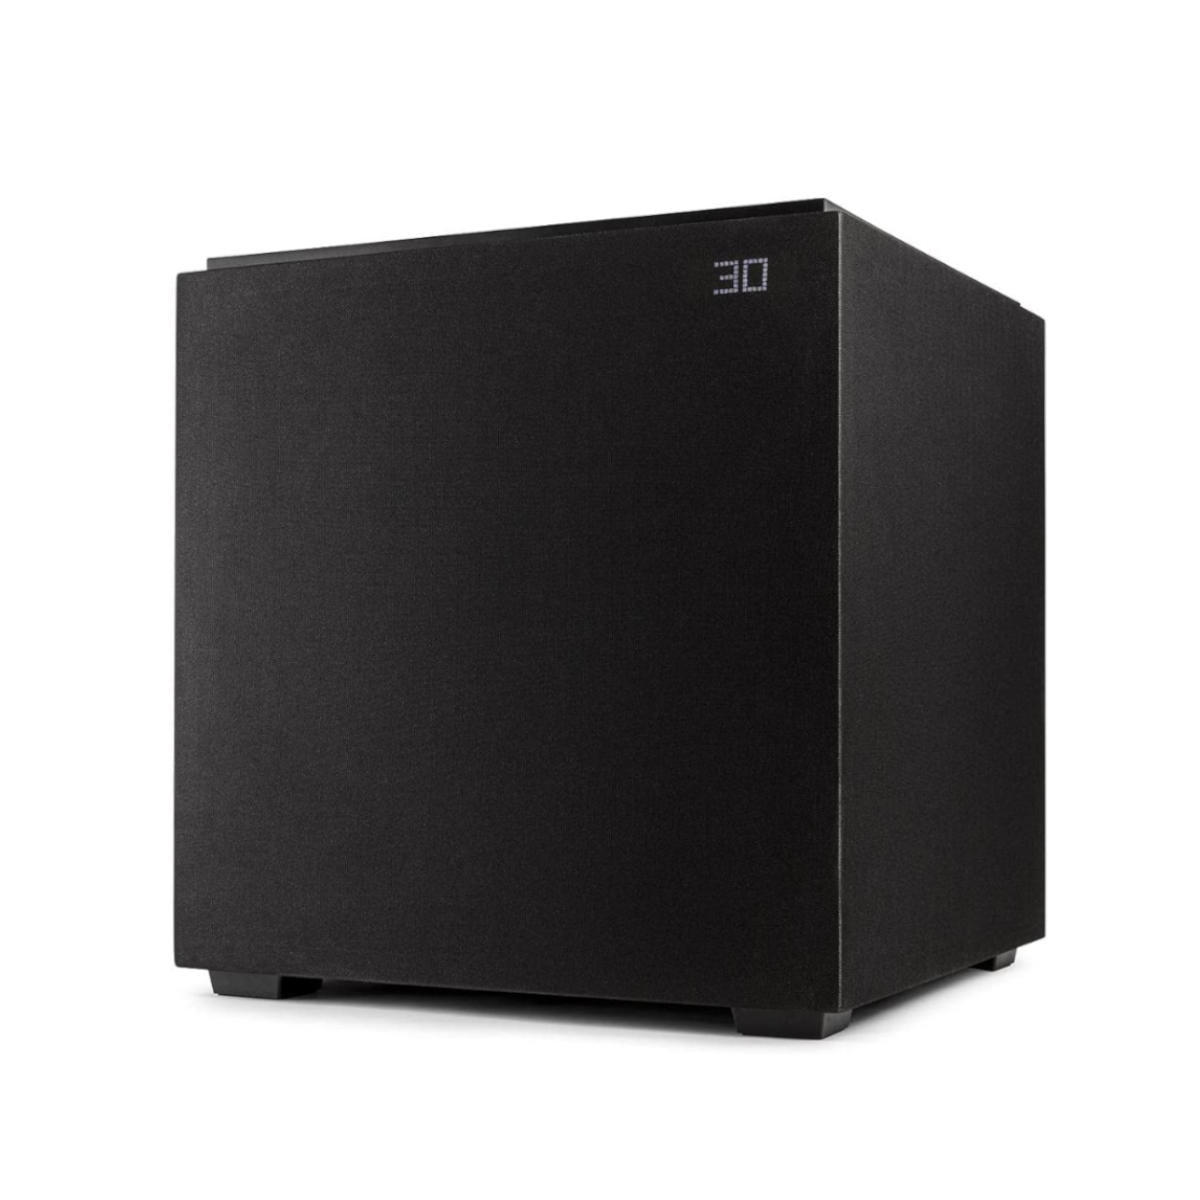 Definitive Technology Descend Series DN15 15” Subwoofer - Ooberpad India